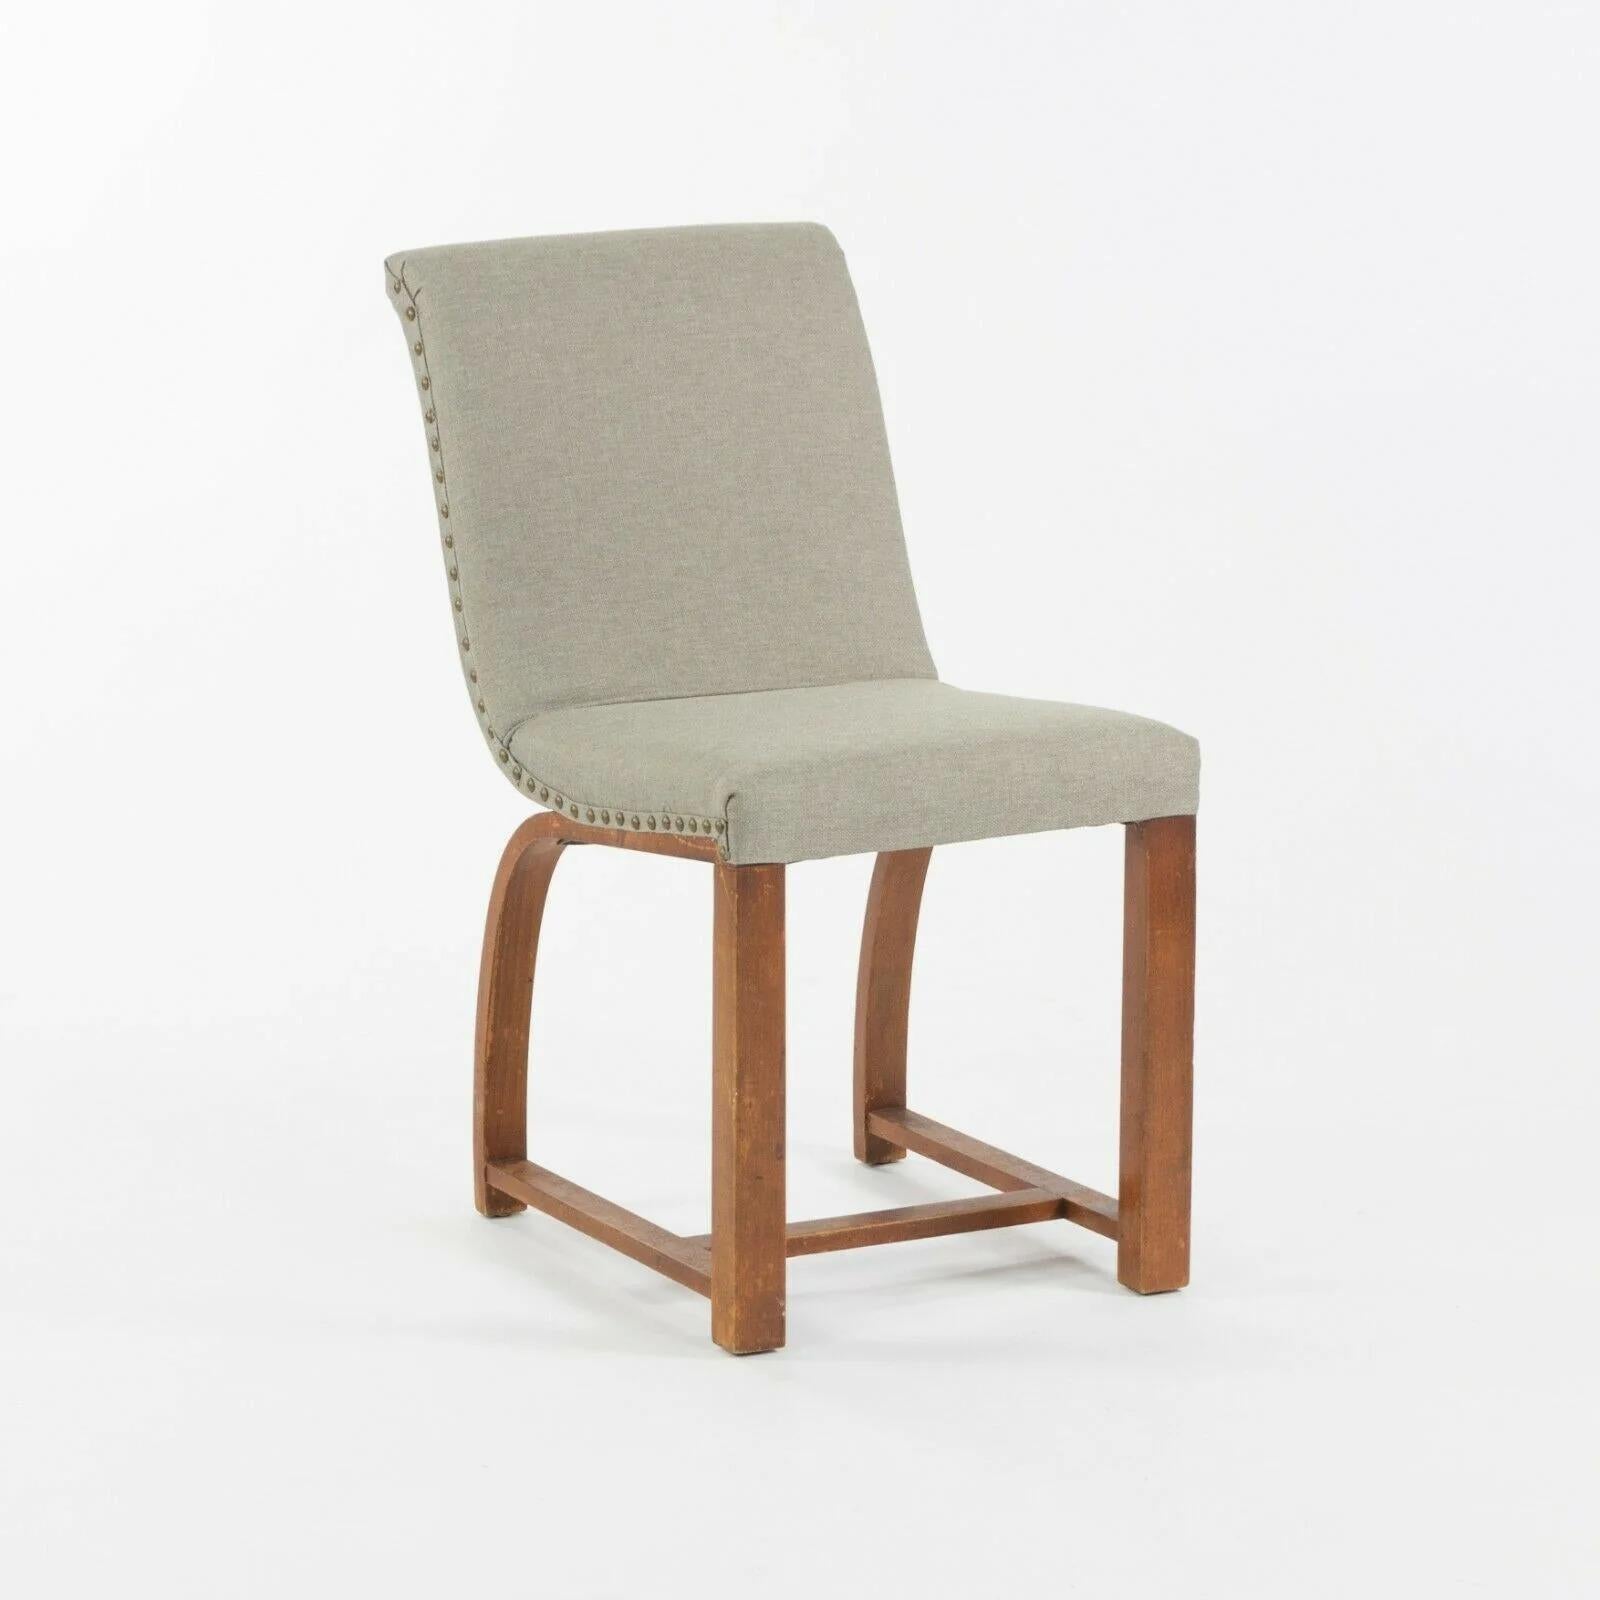 Modern 1930s Set of 4 Gilbert Rohde Dining Chairs for Heywood Wakefield in Knoll Fabric For Sale